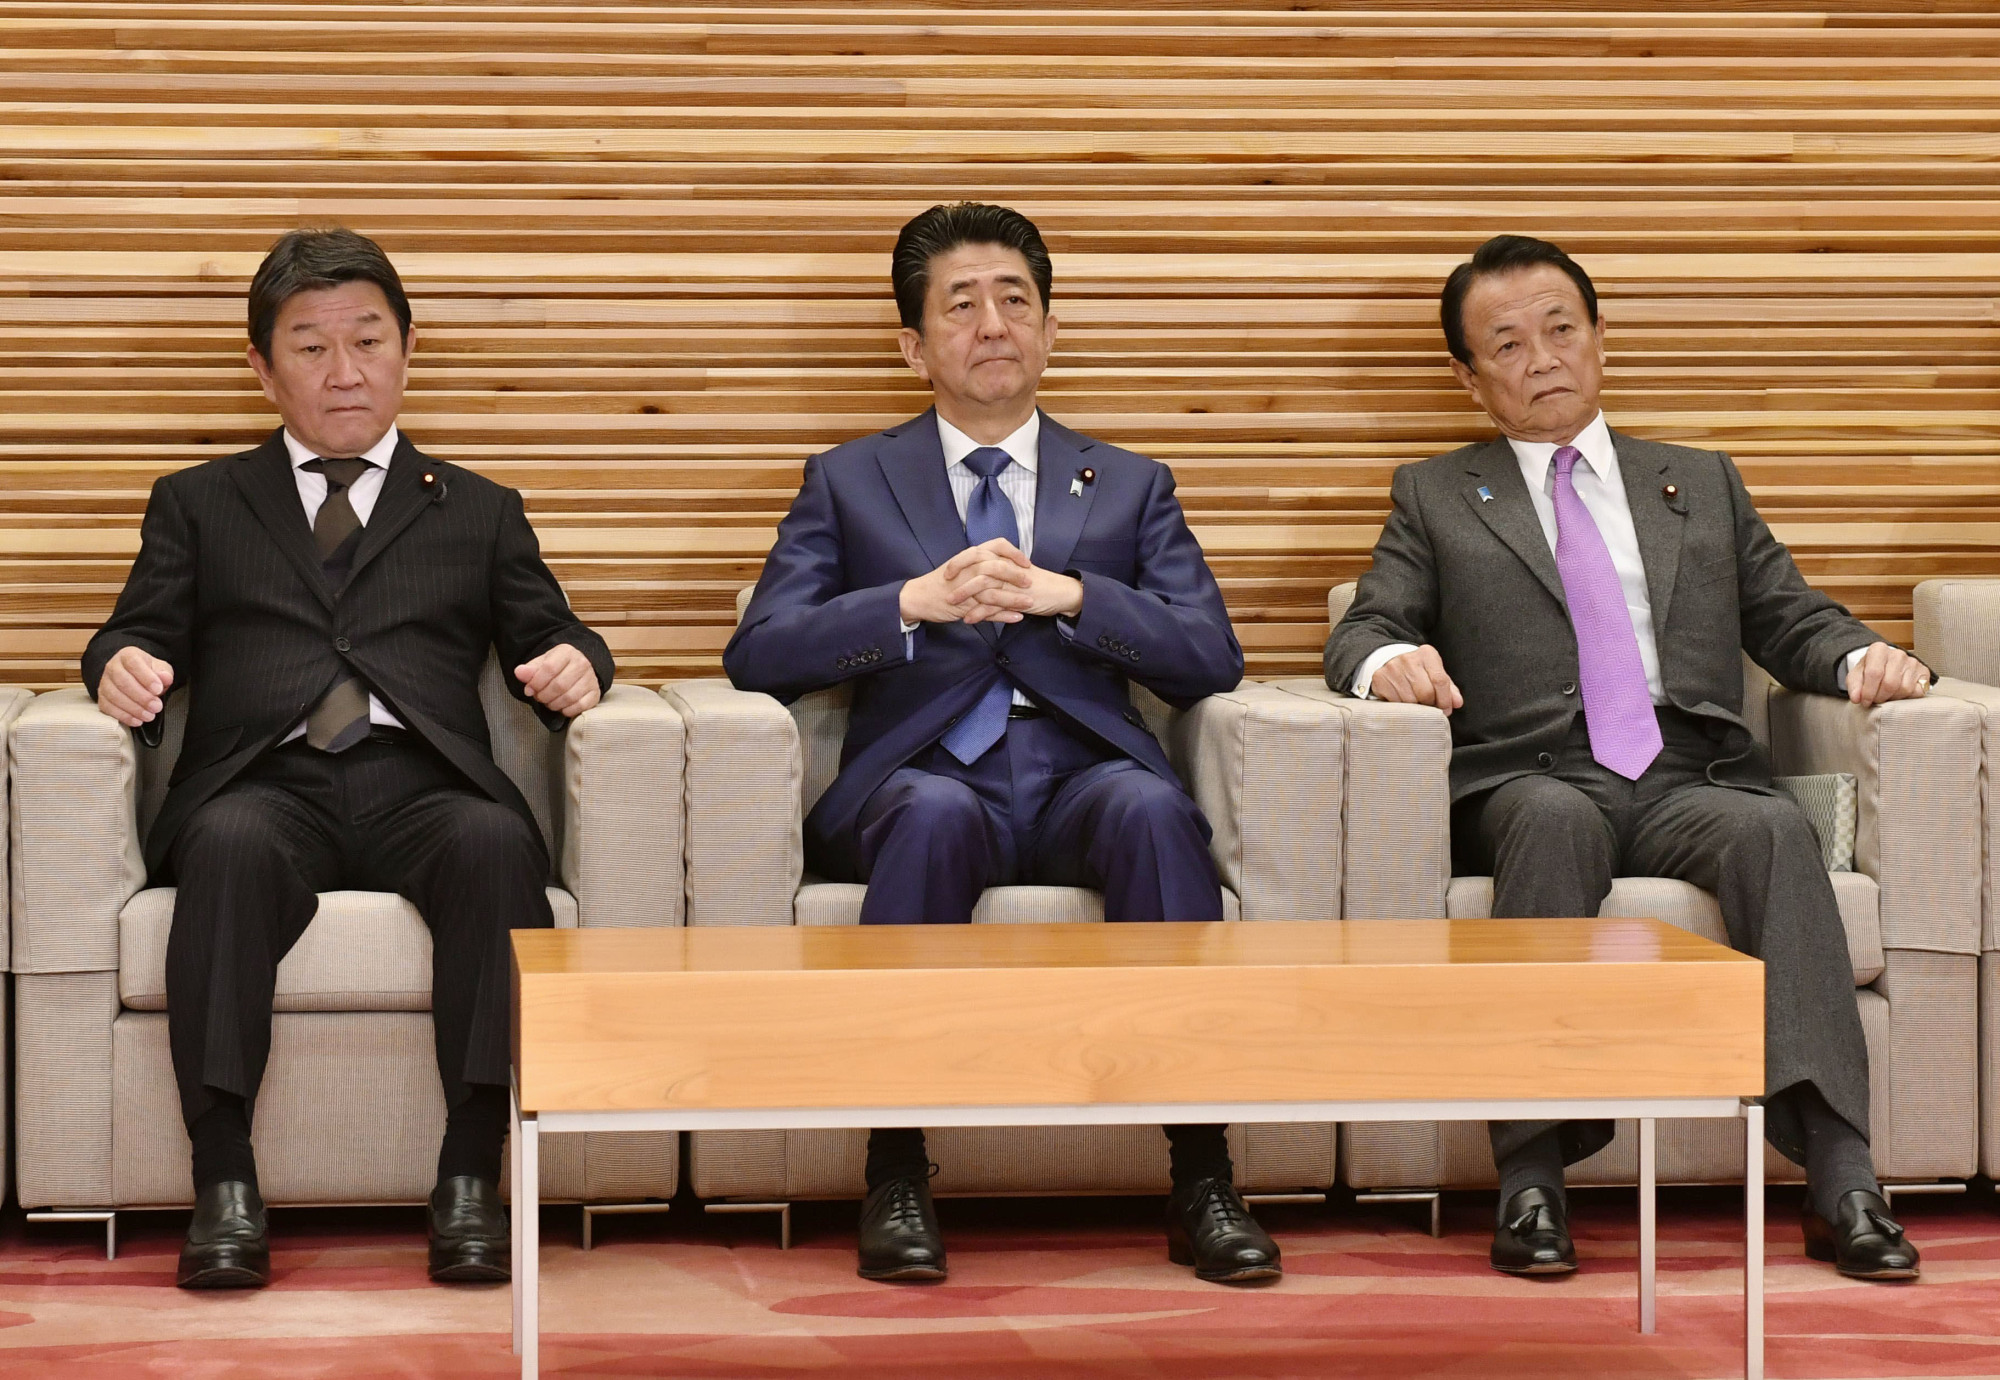 Flanked by Foreign Minister Toshimitsu Motegi (left) and Finance Minister Taro Aso, Prime Minister Shinzo Abe attends a Cabinet meeting Friday to approve bills on a tax reform package for fiscal 2020. | KYODO